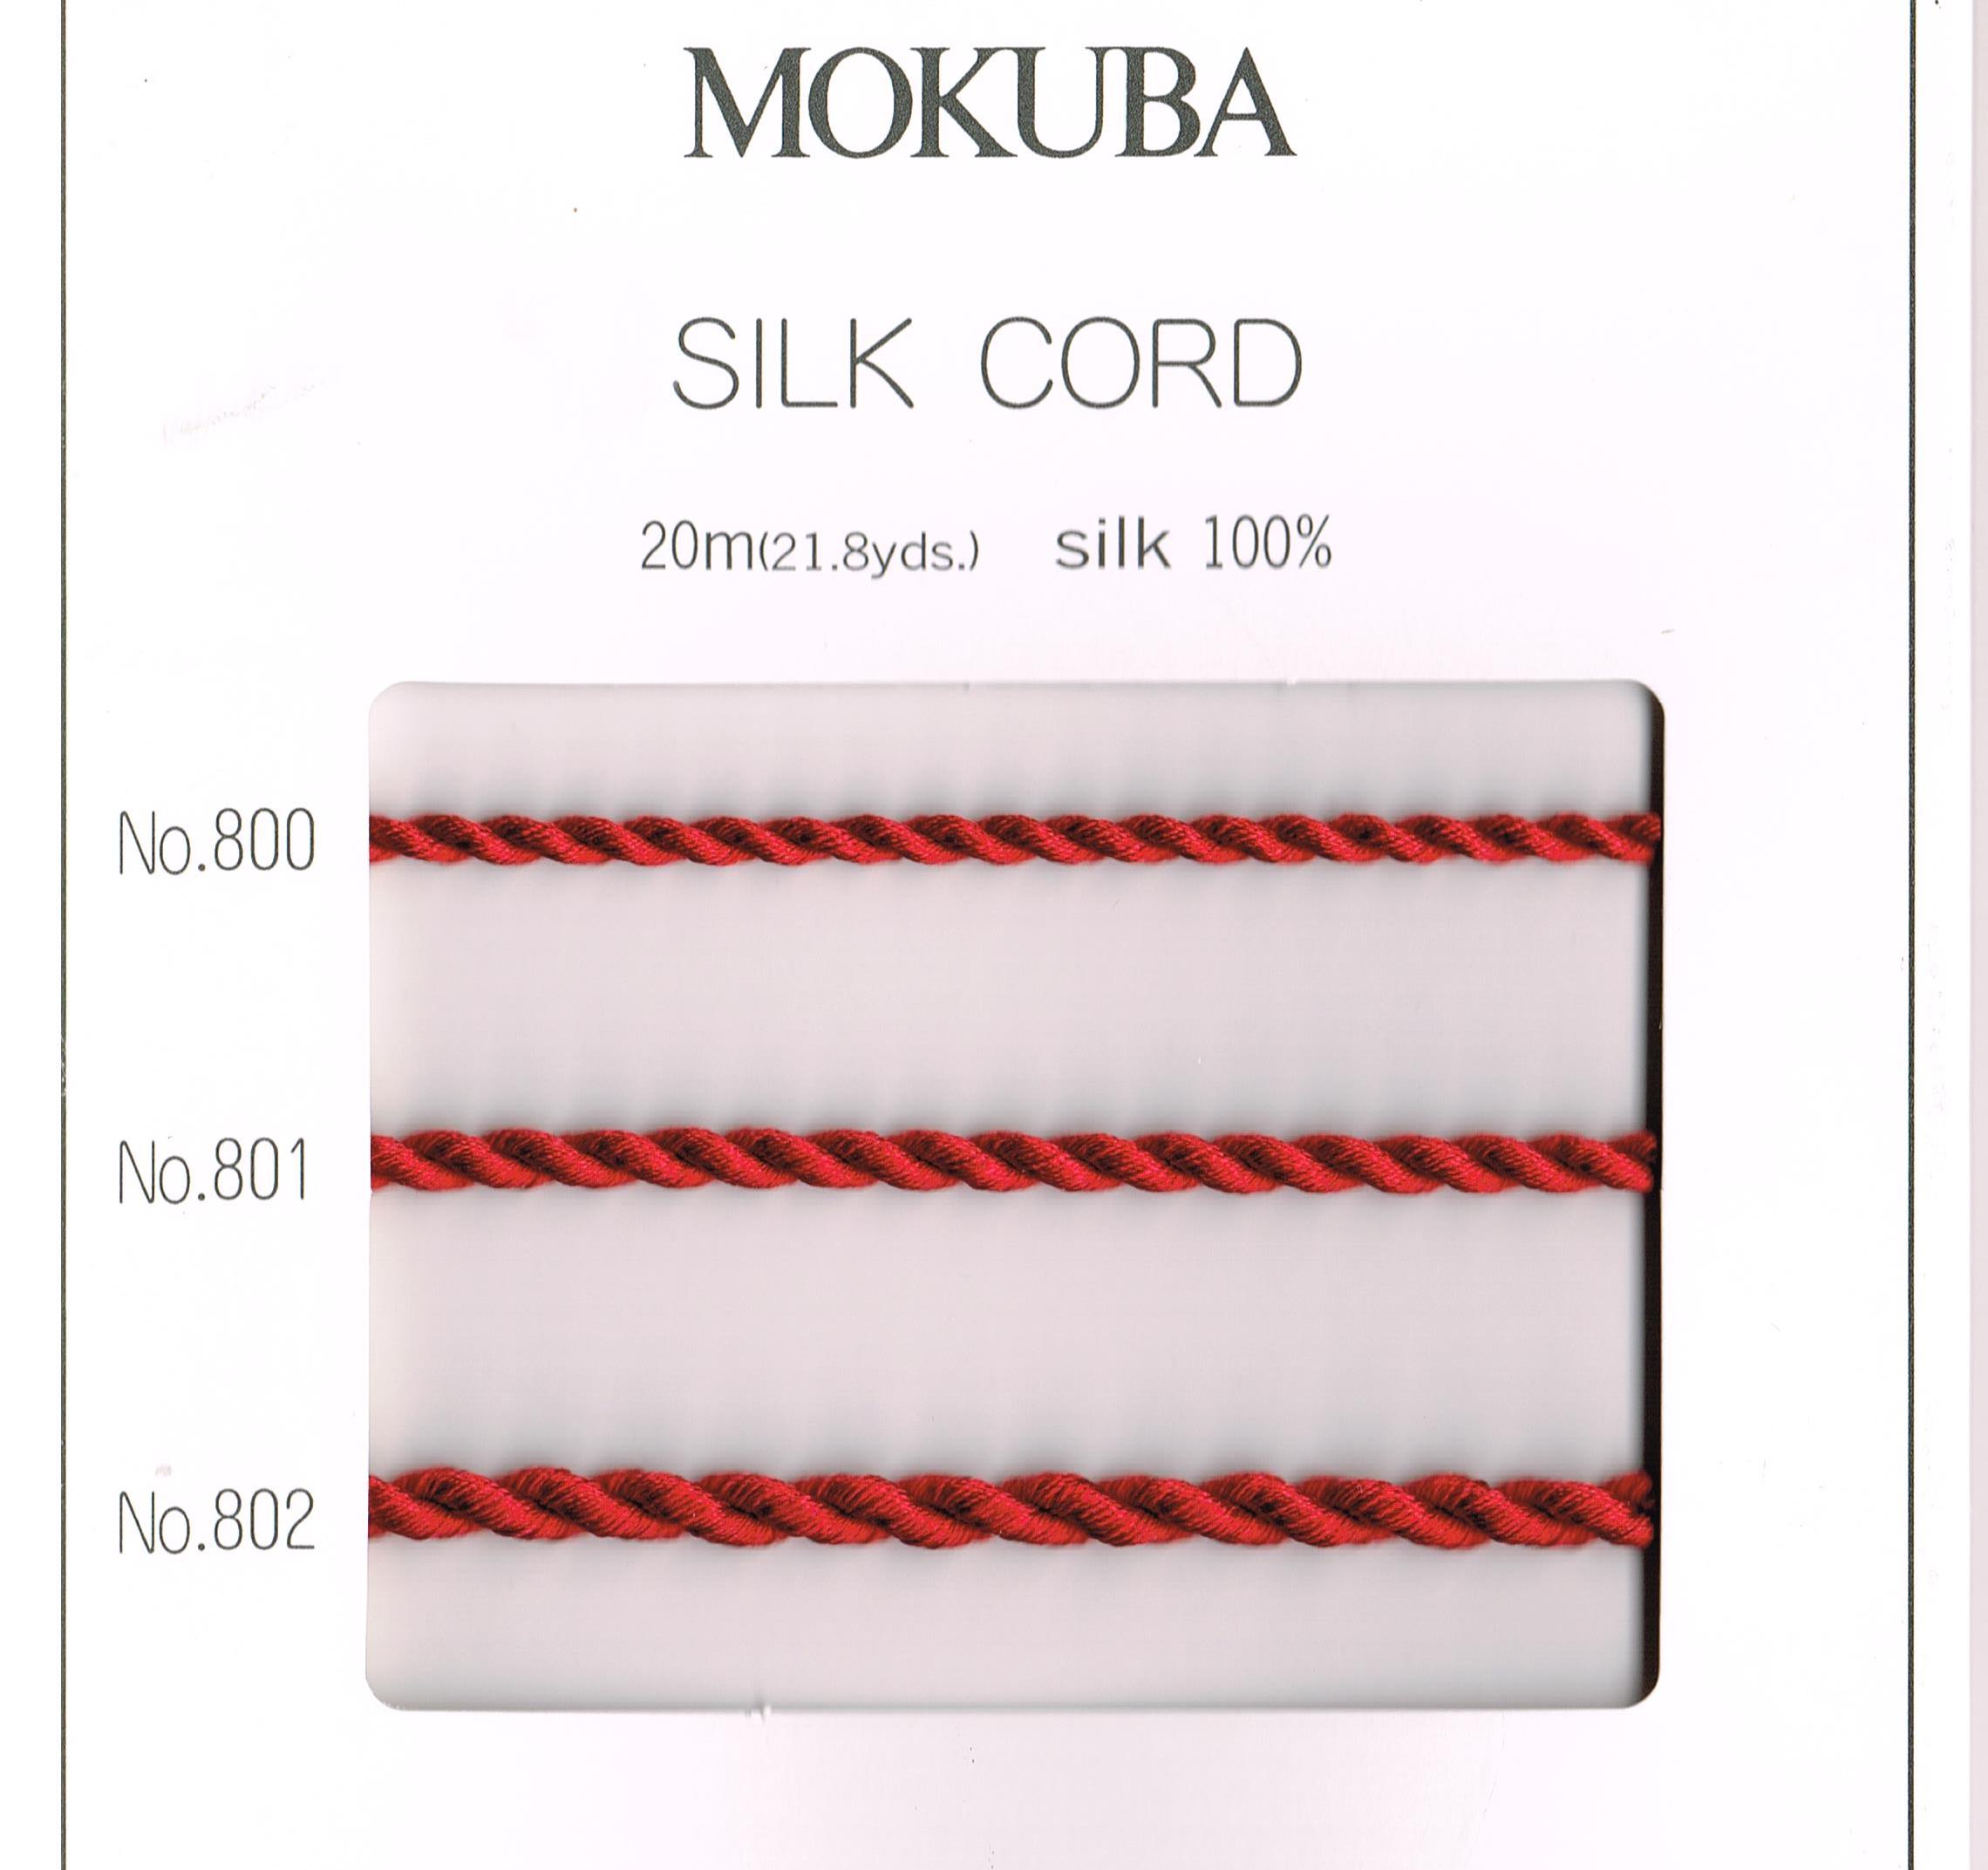 Silk cord: Classic Doll Modes is your source for doll-making needs